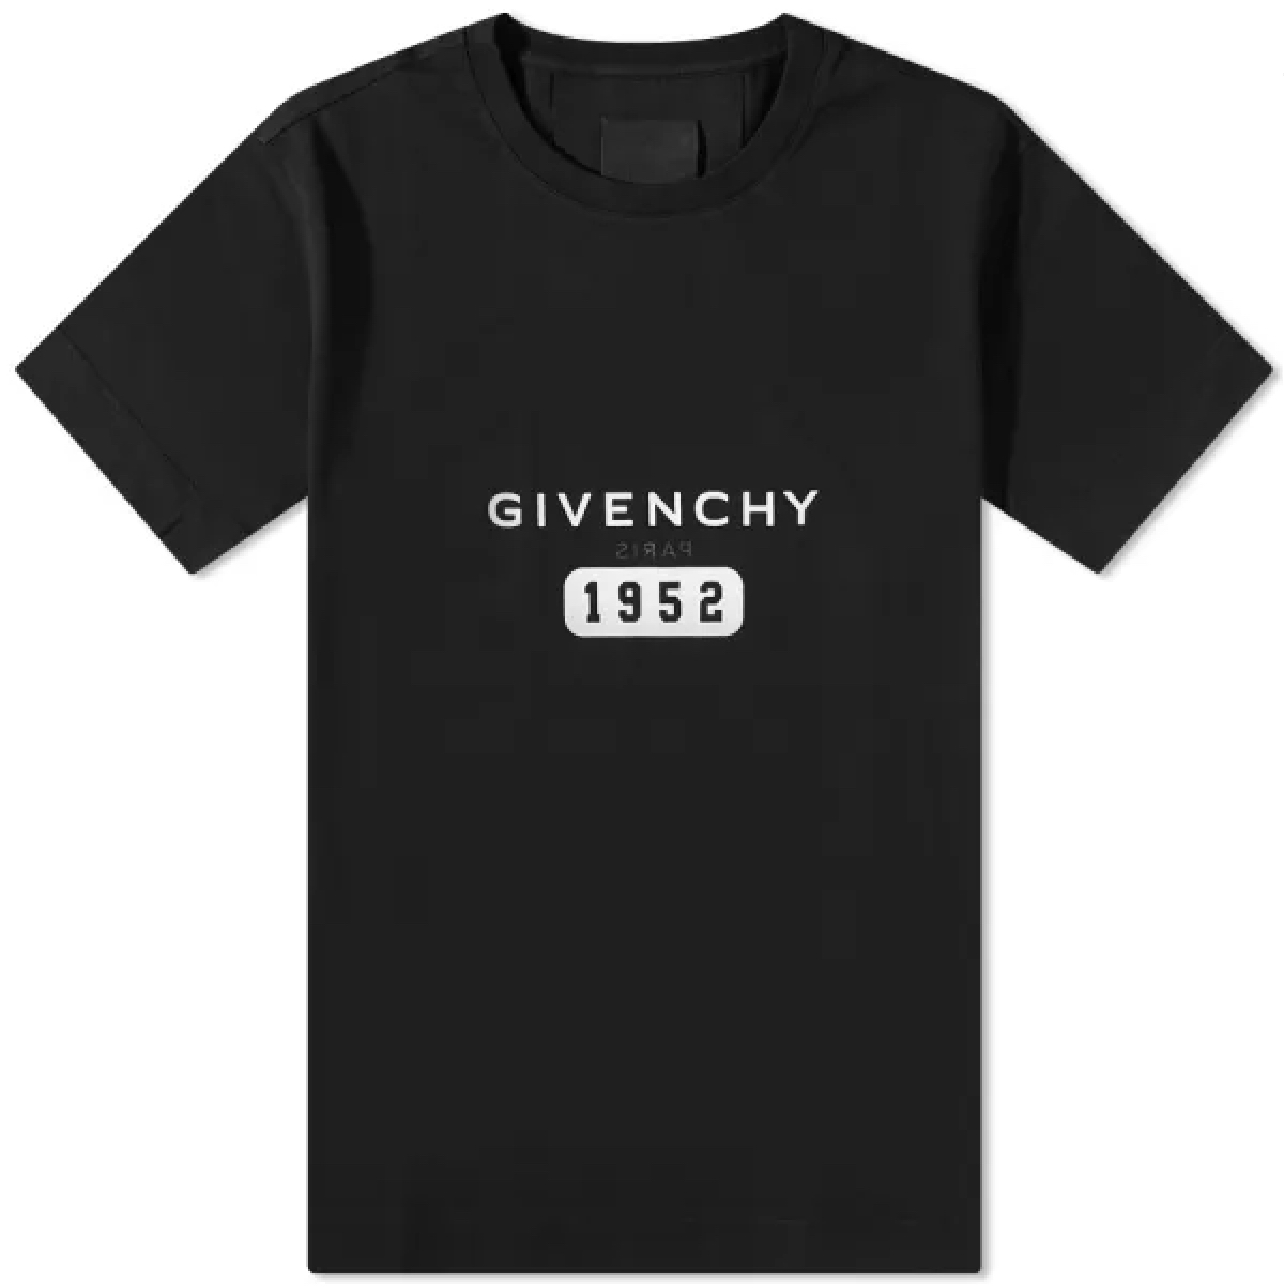 Givenchy – Luxfashionsource